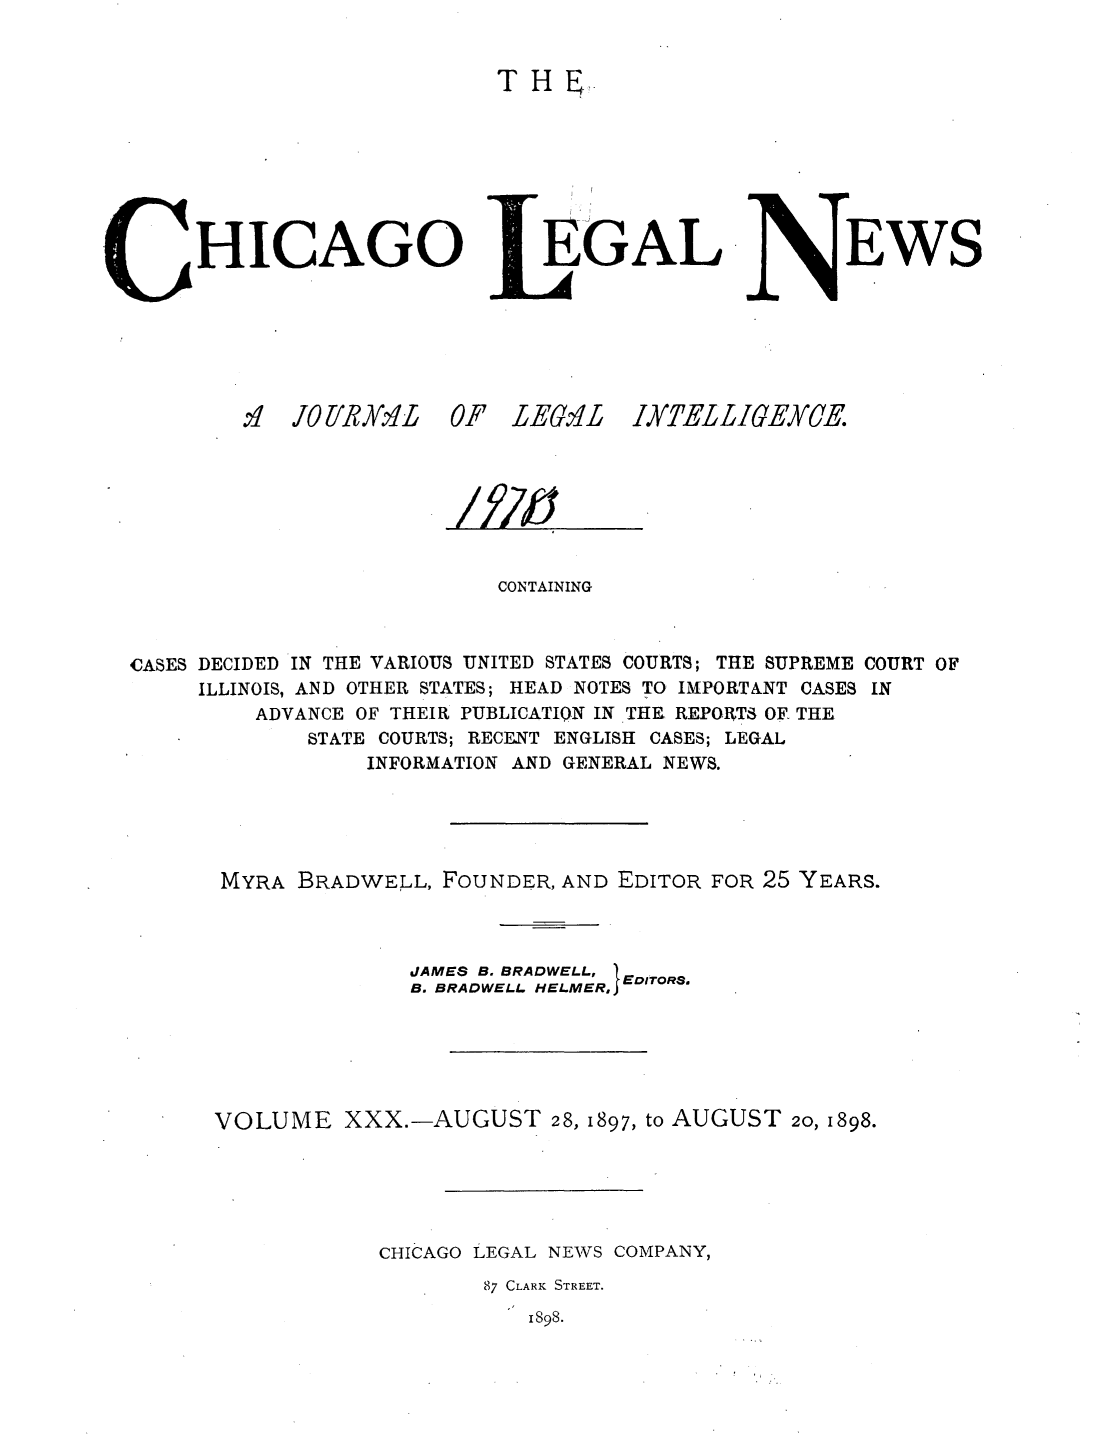 handle is hein.journals/chiclene30 and id is 1 raw text is: TH,HICAGO.:1 OrYRyKA'L 0.EGALI LEM LEWSCONTAININGCASES DECIDED IN THE VARIOUS UNITED STATES COURTS; THE SUPREME COURT OFILLINOIS, AND OTHER STATES; HEAD NOTES TO IMPORTANT CASES INADVANCE OF THEIR PUBLICATION IN THE REPORTS OF. THESTATE COURTS; RECENT ENGLISH CASES; LEGALINFORMATION AND GENERAL NEWS.MYRA BRADWELL, FOUNDER, AND EDITOR FOR 25 YEARS.JAMES B. BRADWELL, EB. BRADWELL HELMER, EDITORS.VOLUME XXX.-AUGUST 28, 1897, to AUGUST 20, 1898.CHICAGO LEGAL NEWS COMPANY,87 CLARK STREET.1898.IX'ELLIGEYJE/f/dy